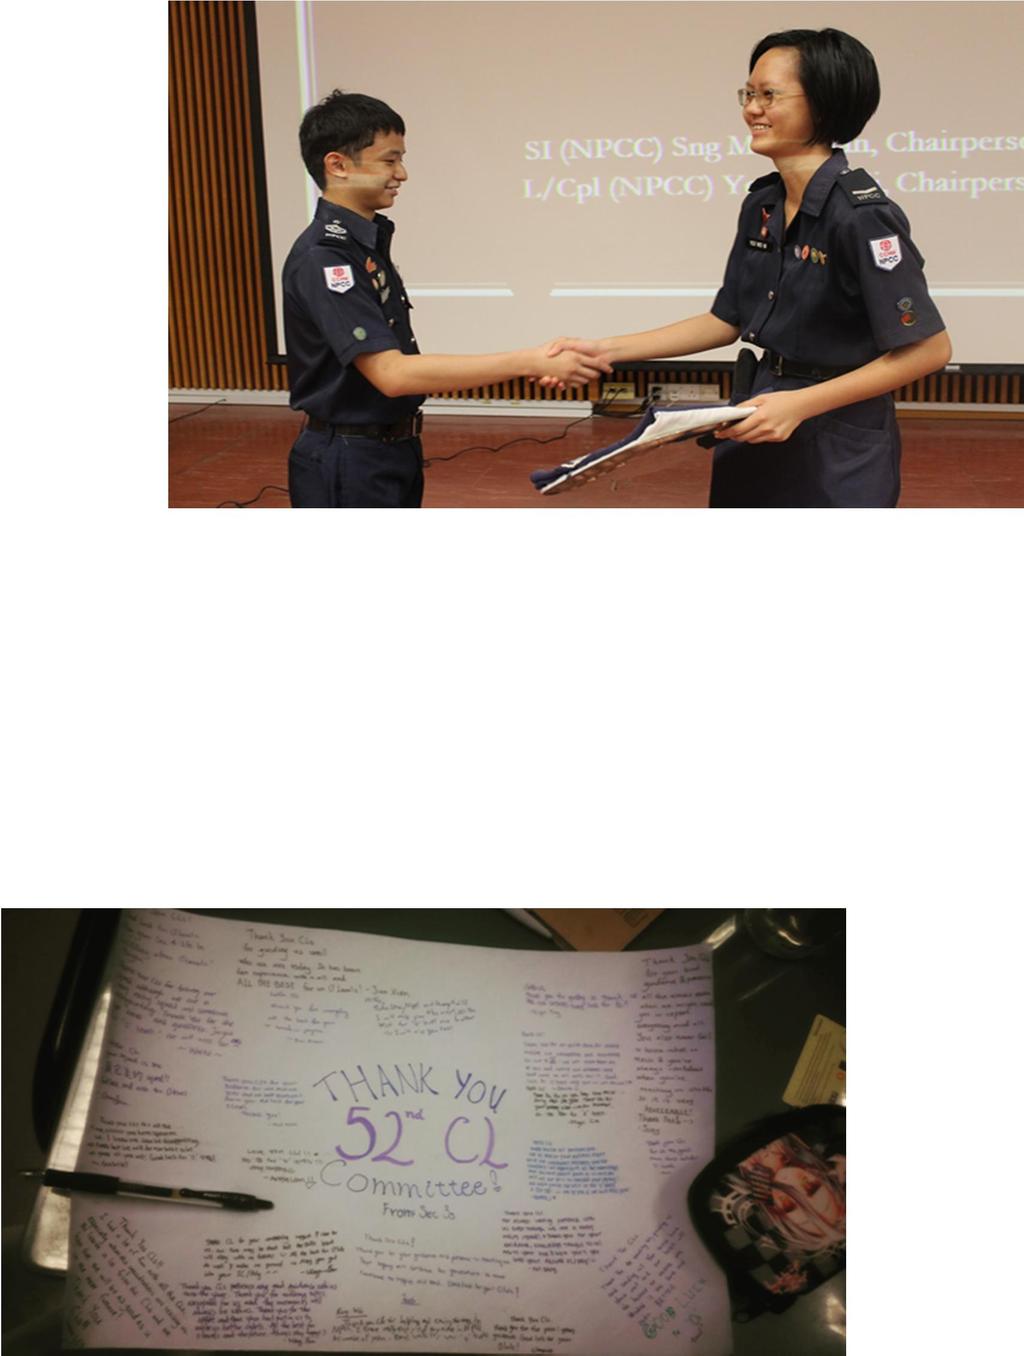 Chairperson of the 52nd CL Committee, SI (NPCC) Sng Ming Xian, passing the NPCC flag to the Chairperson of the 53rd CL Committee, L/Cpl (NPCC) Yeo Wei Ni.